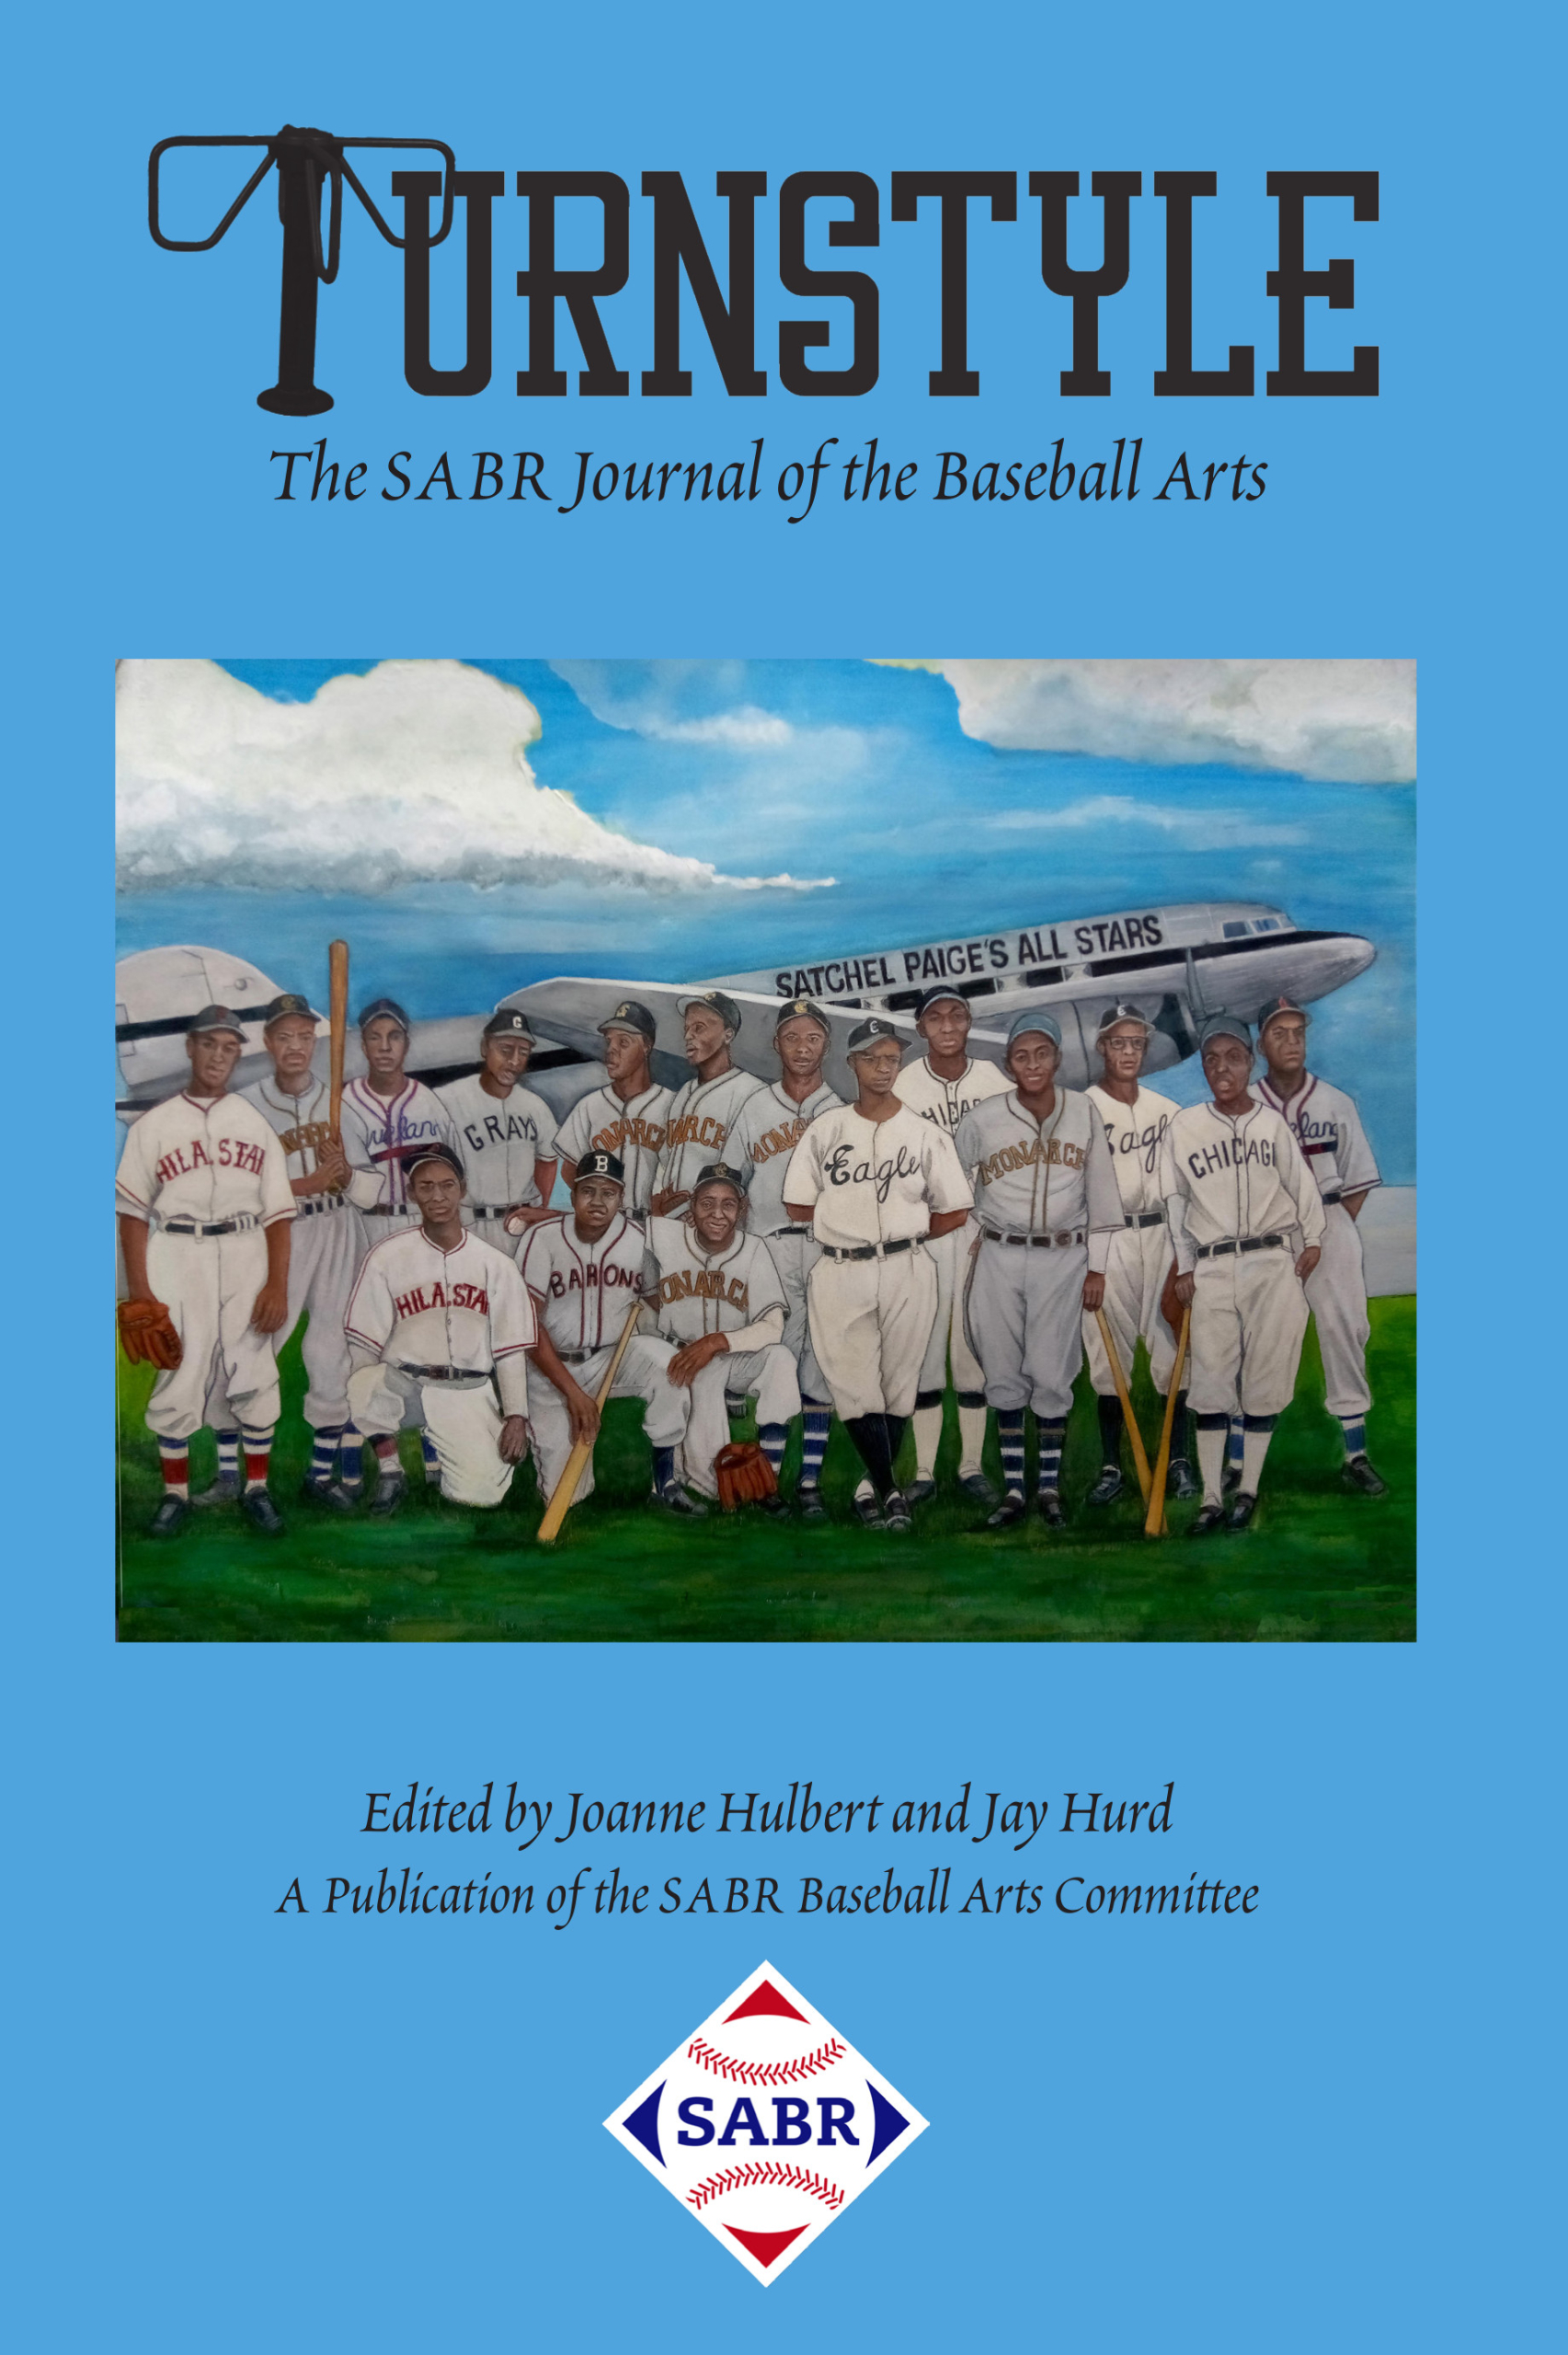 Turnstyle: The SABR Journal of the Baseball Arts, Volume 3